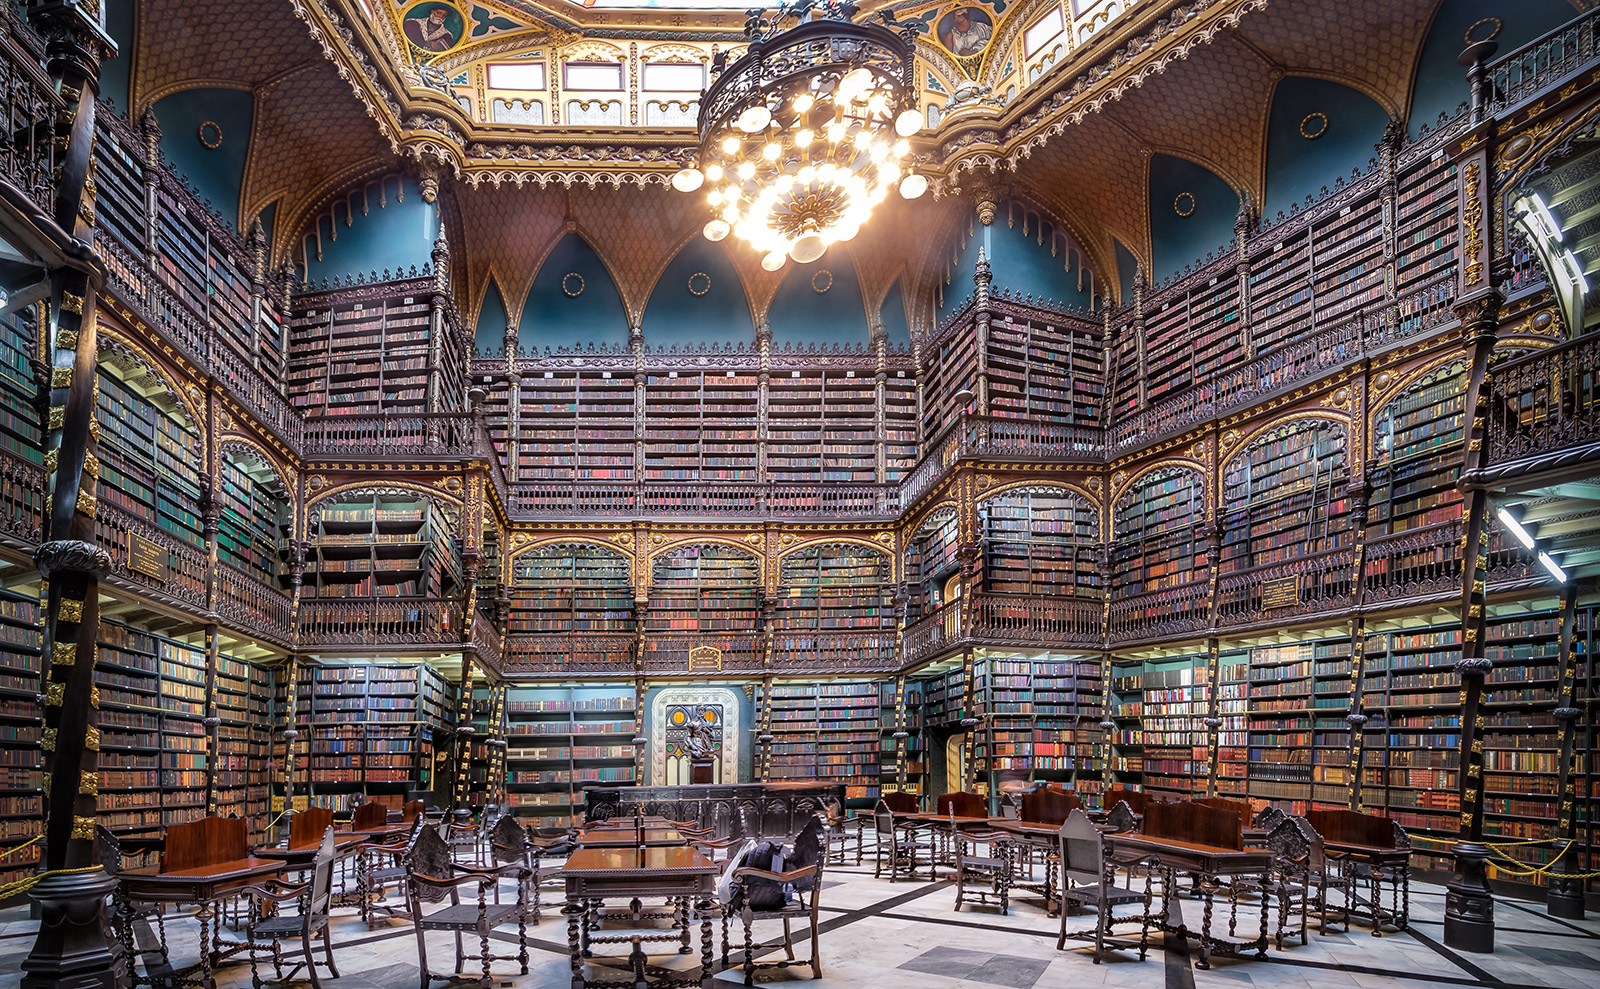 Everything You Need to Know About the Royal Portuguese Cabinet of Reading